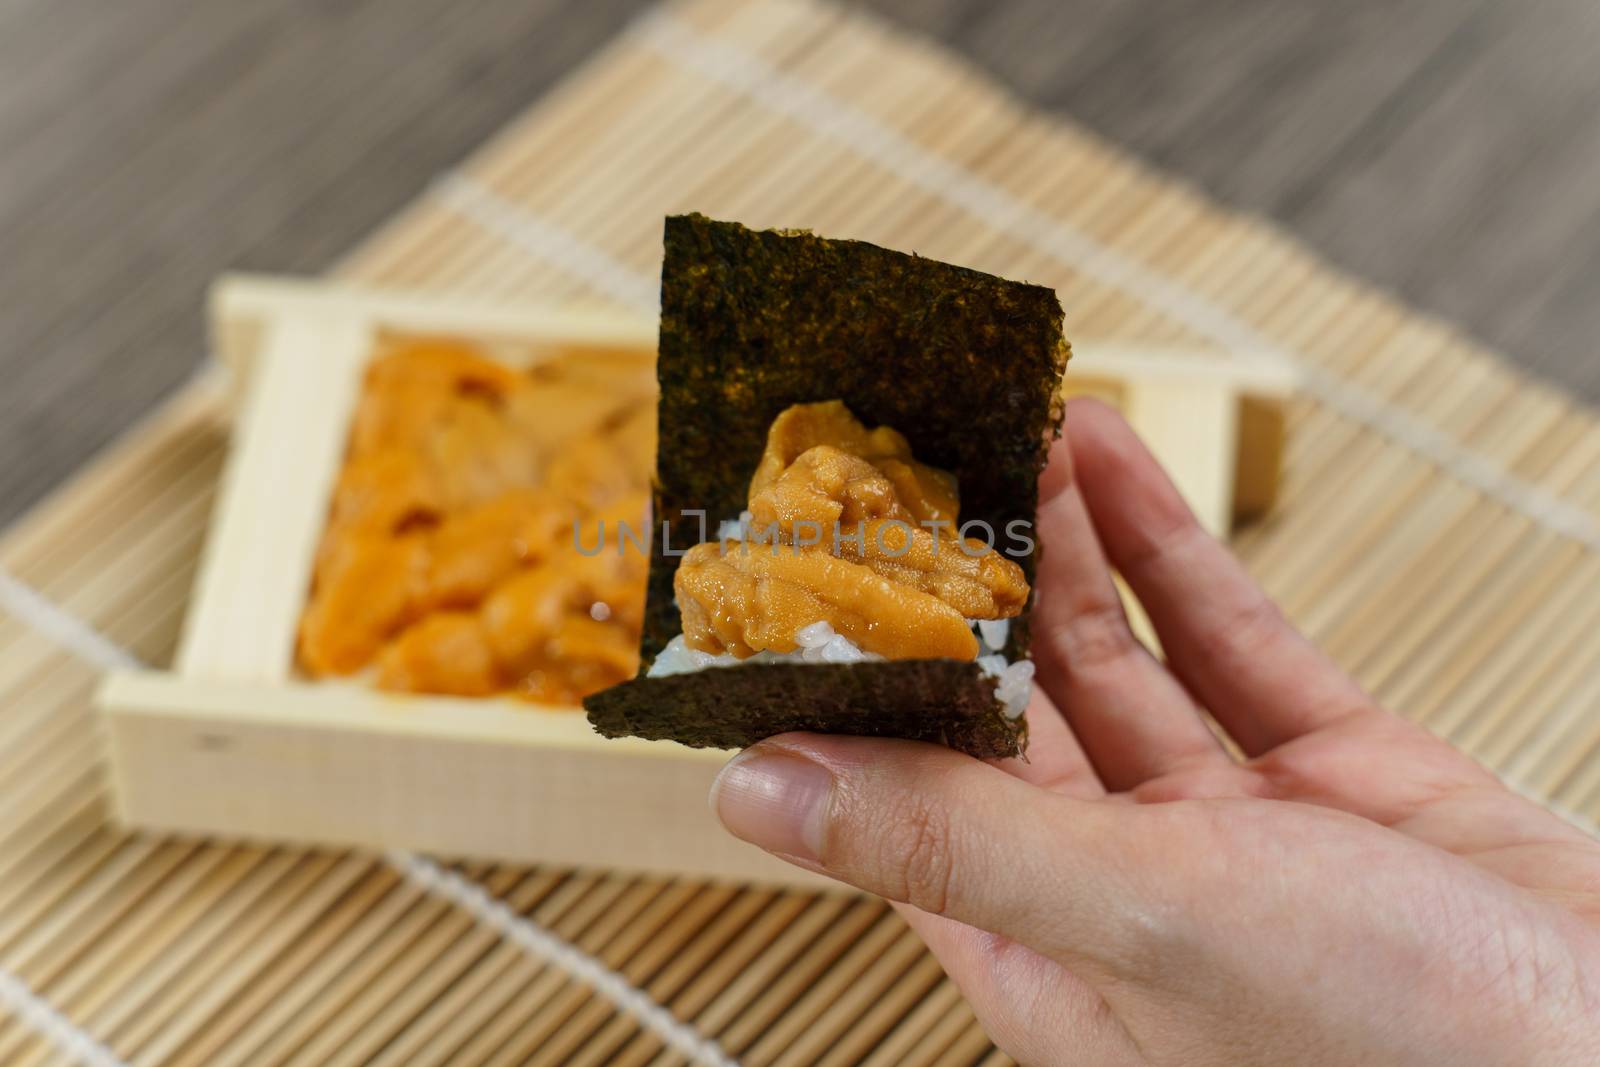 Uni Japanese sea urchin with rice and seaweed in hand.